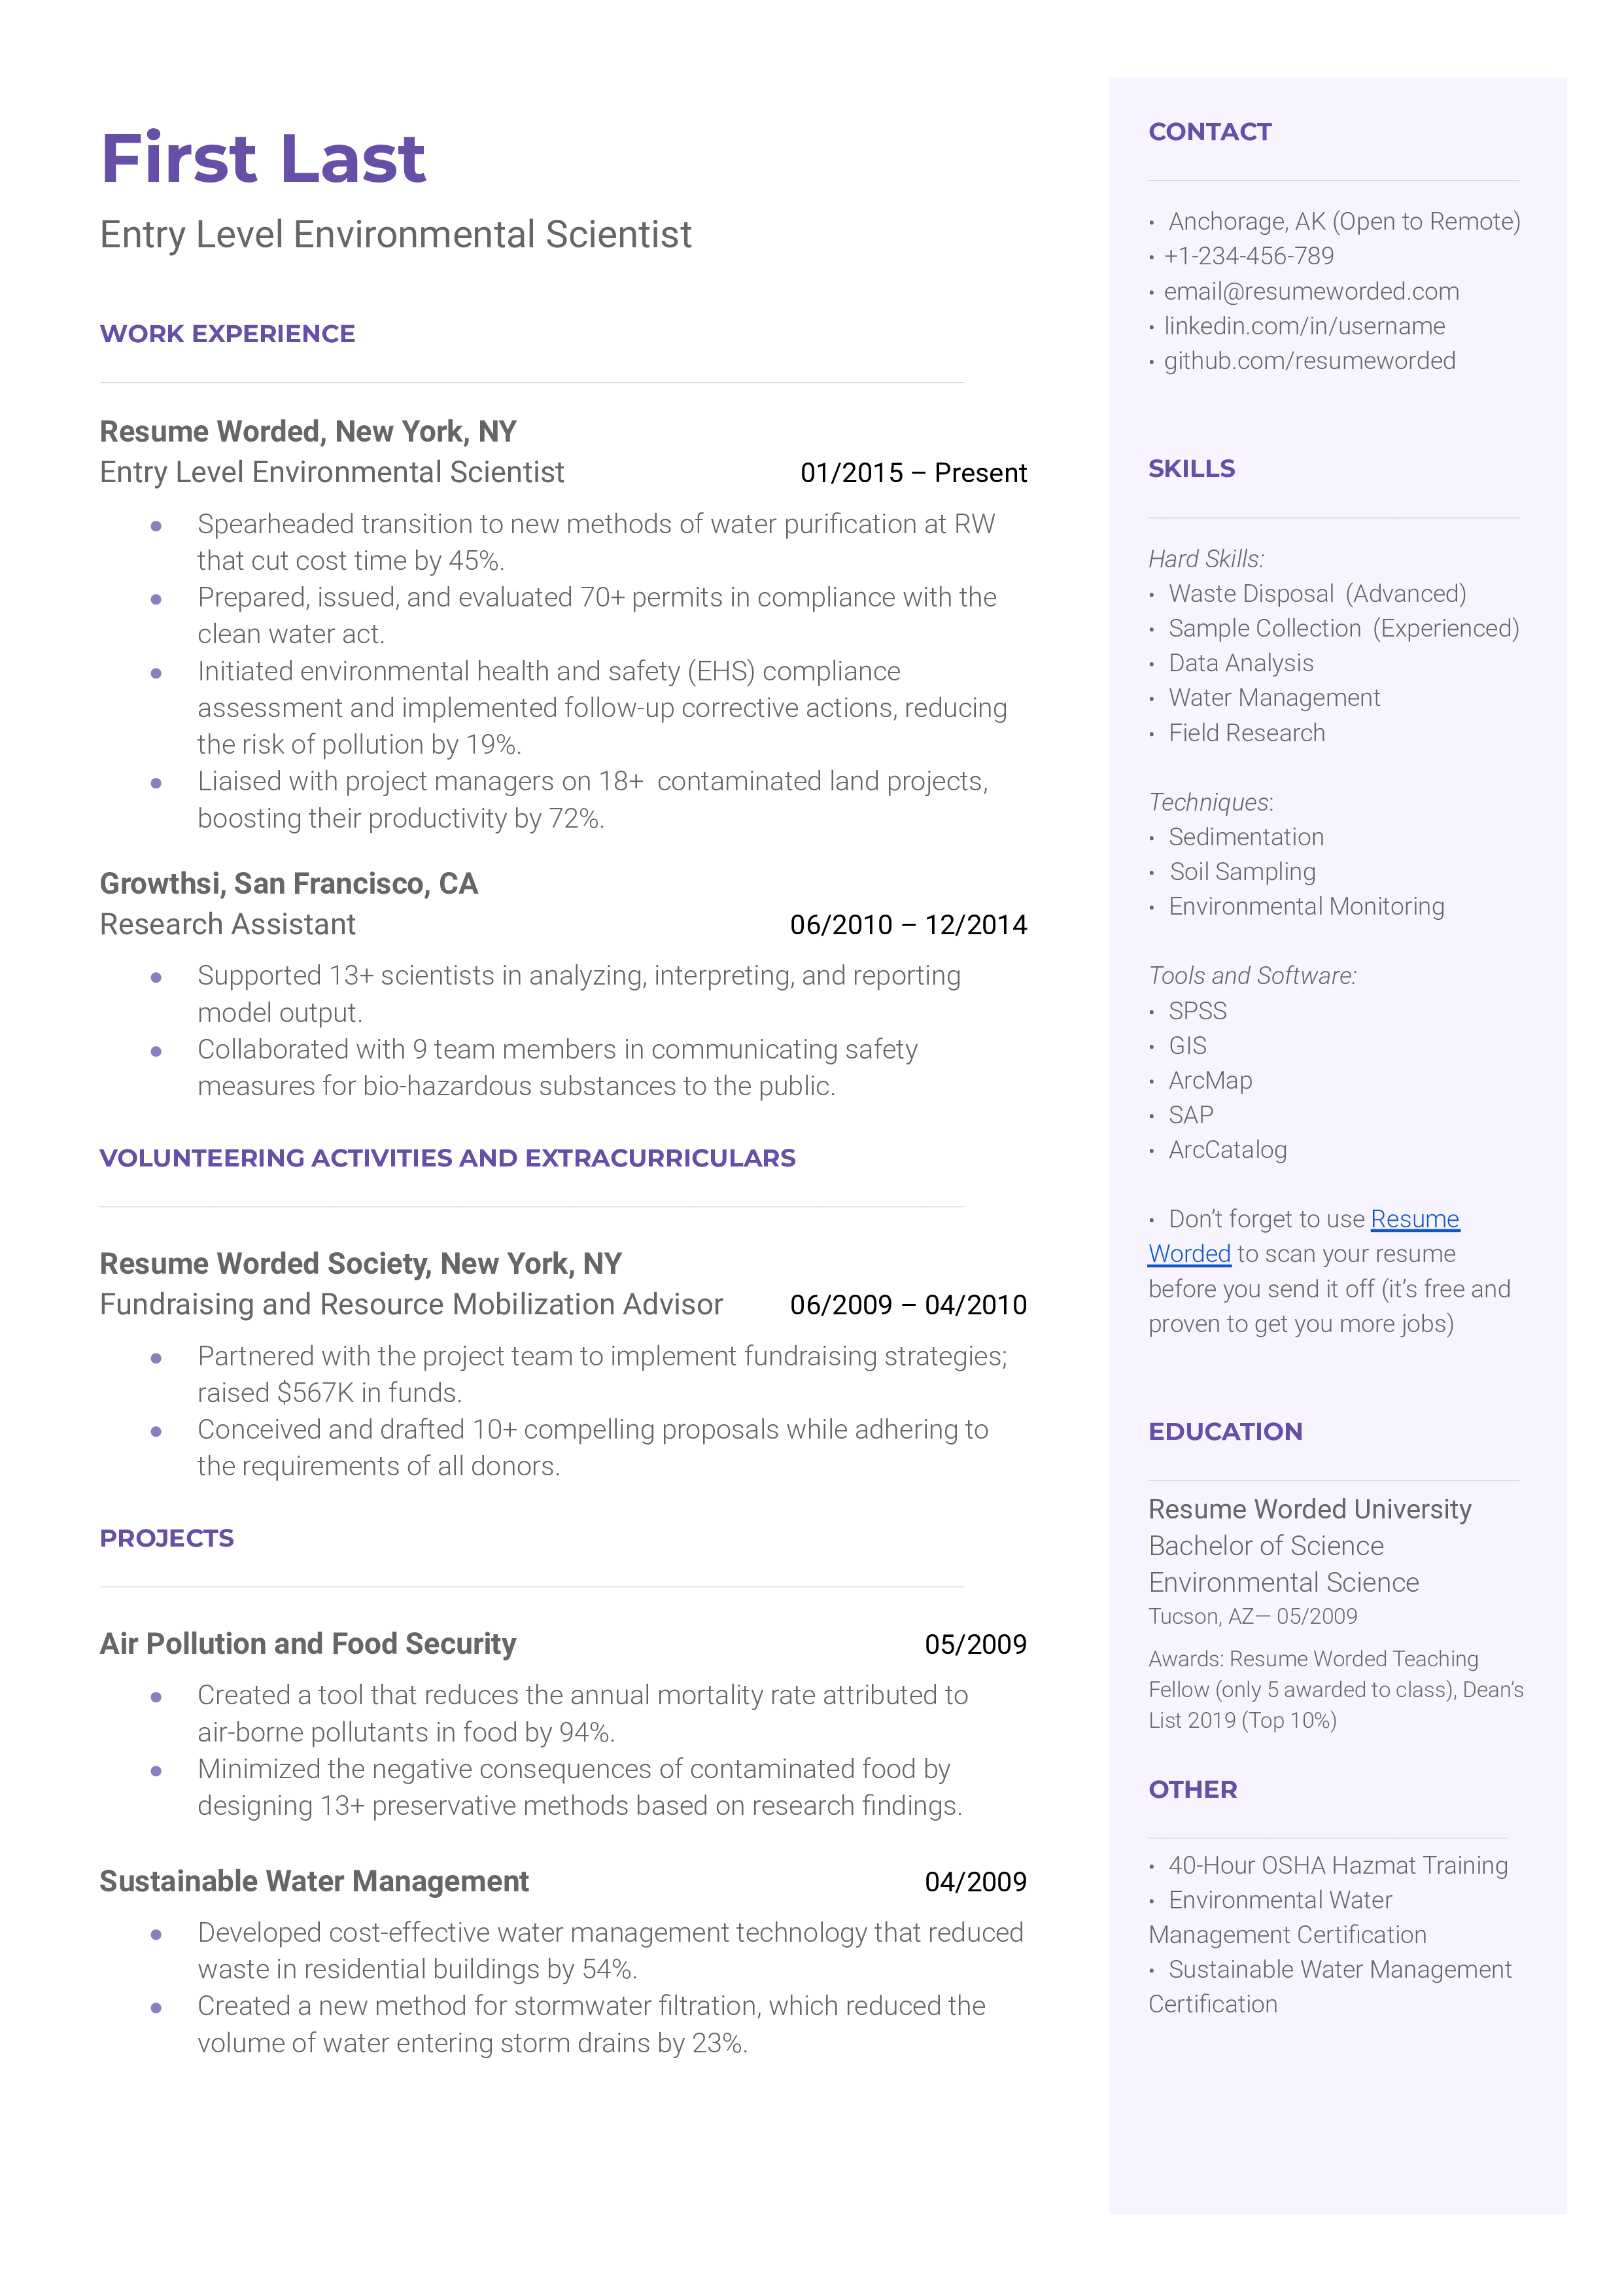 An entry-level environmental science resume template including volunteering experience.